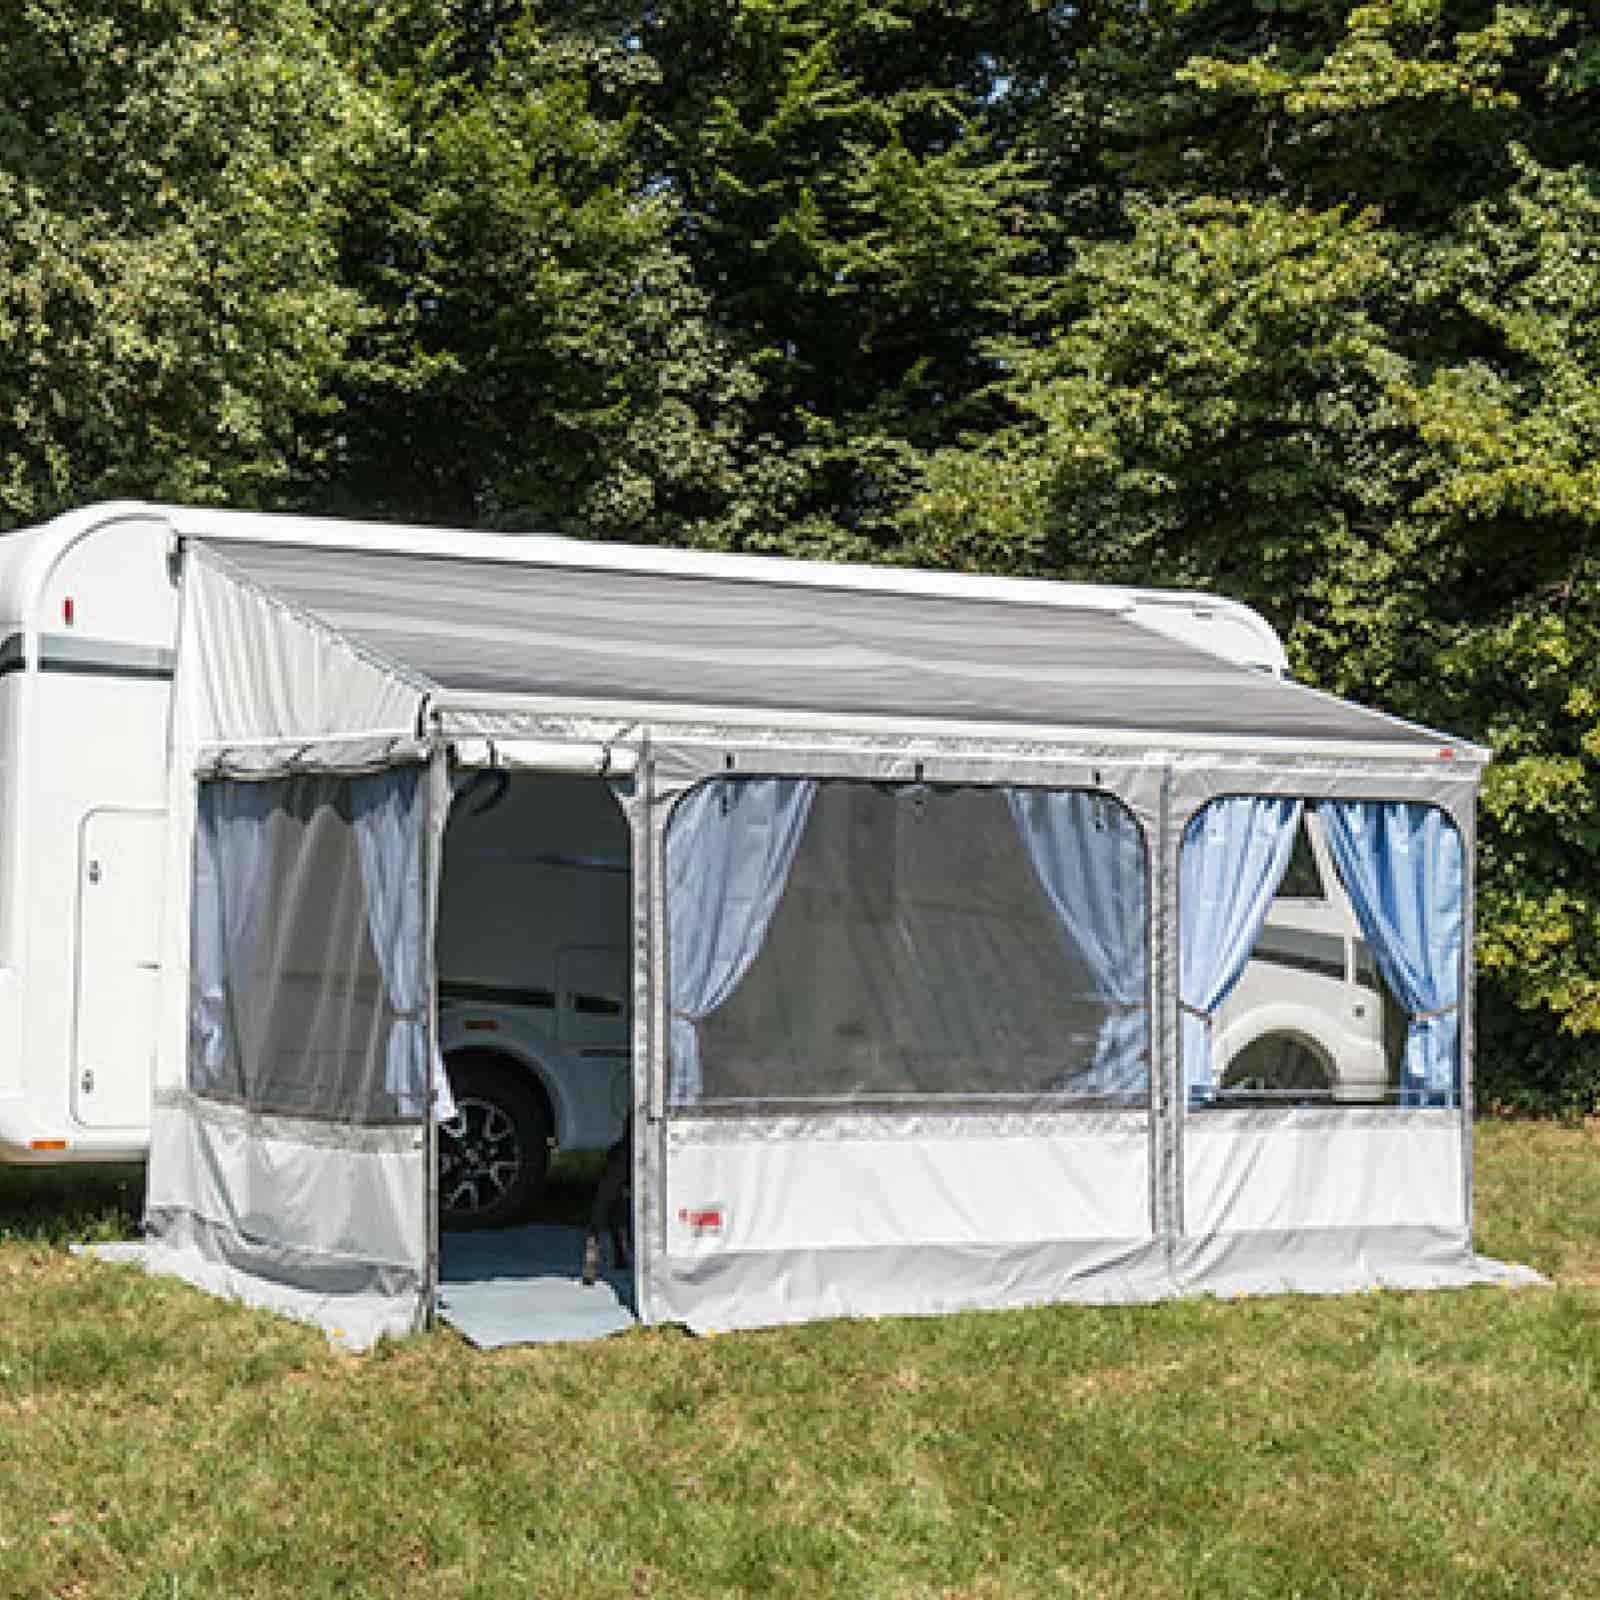 Fiamma Van Privacy Room made by Fiamma. A Tent sold by Quality Caravan Awnings